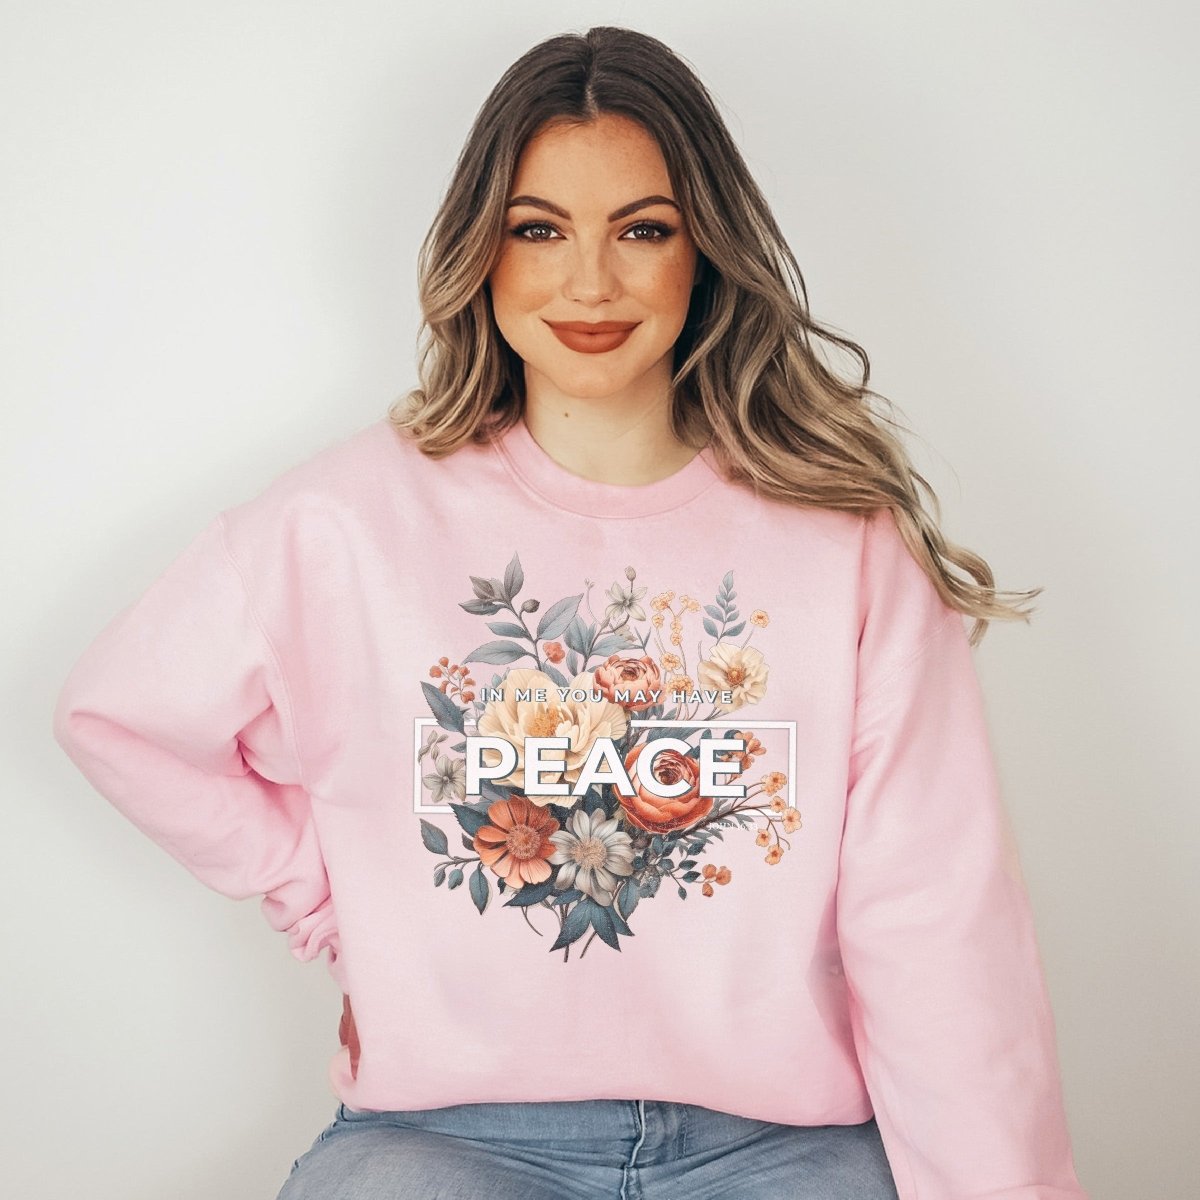 May You Have Peace Crew Sweatshirt - Limeberry Designs